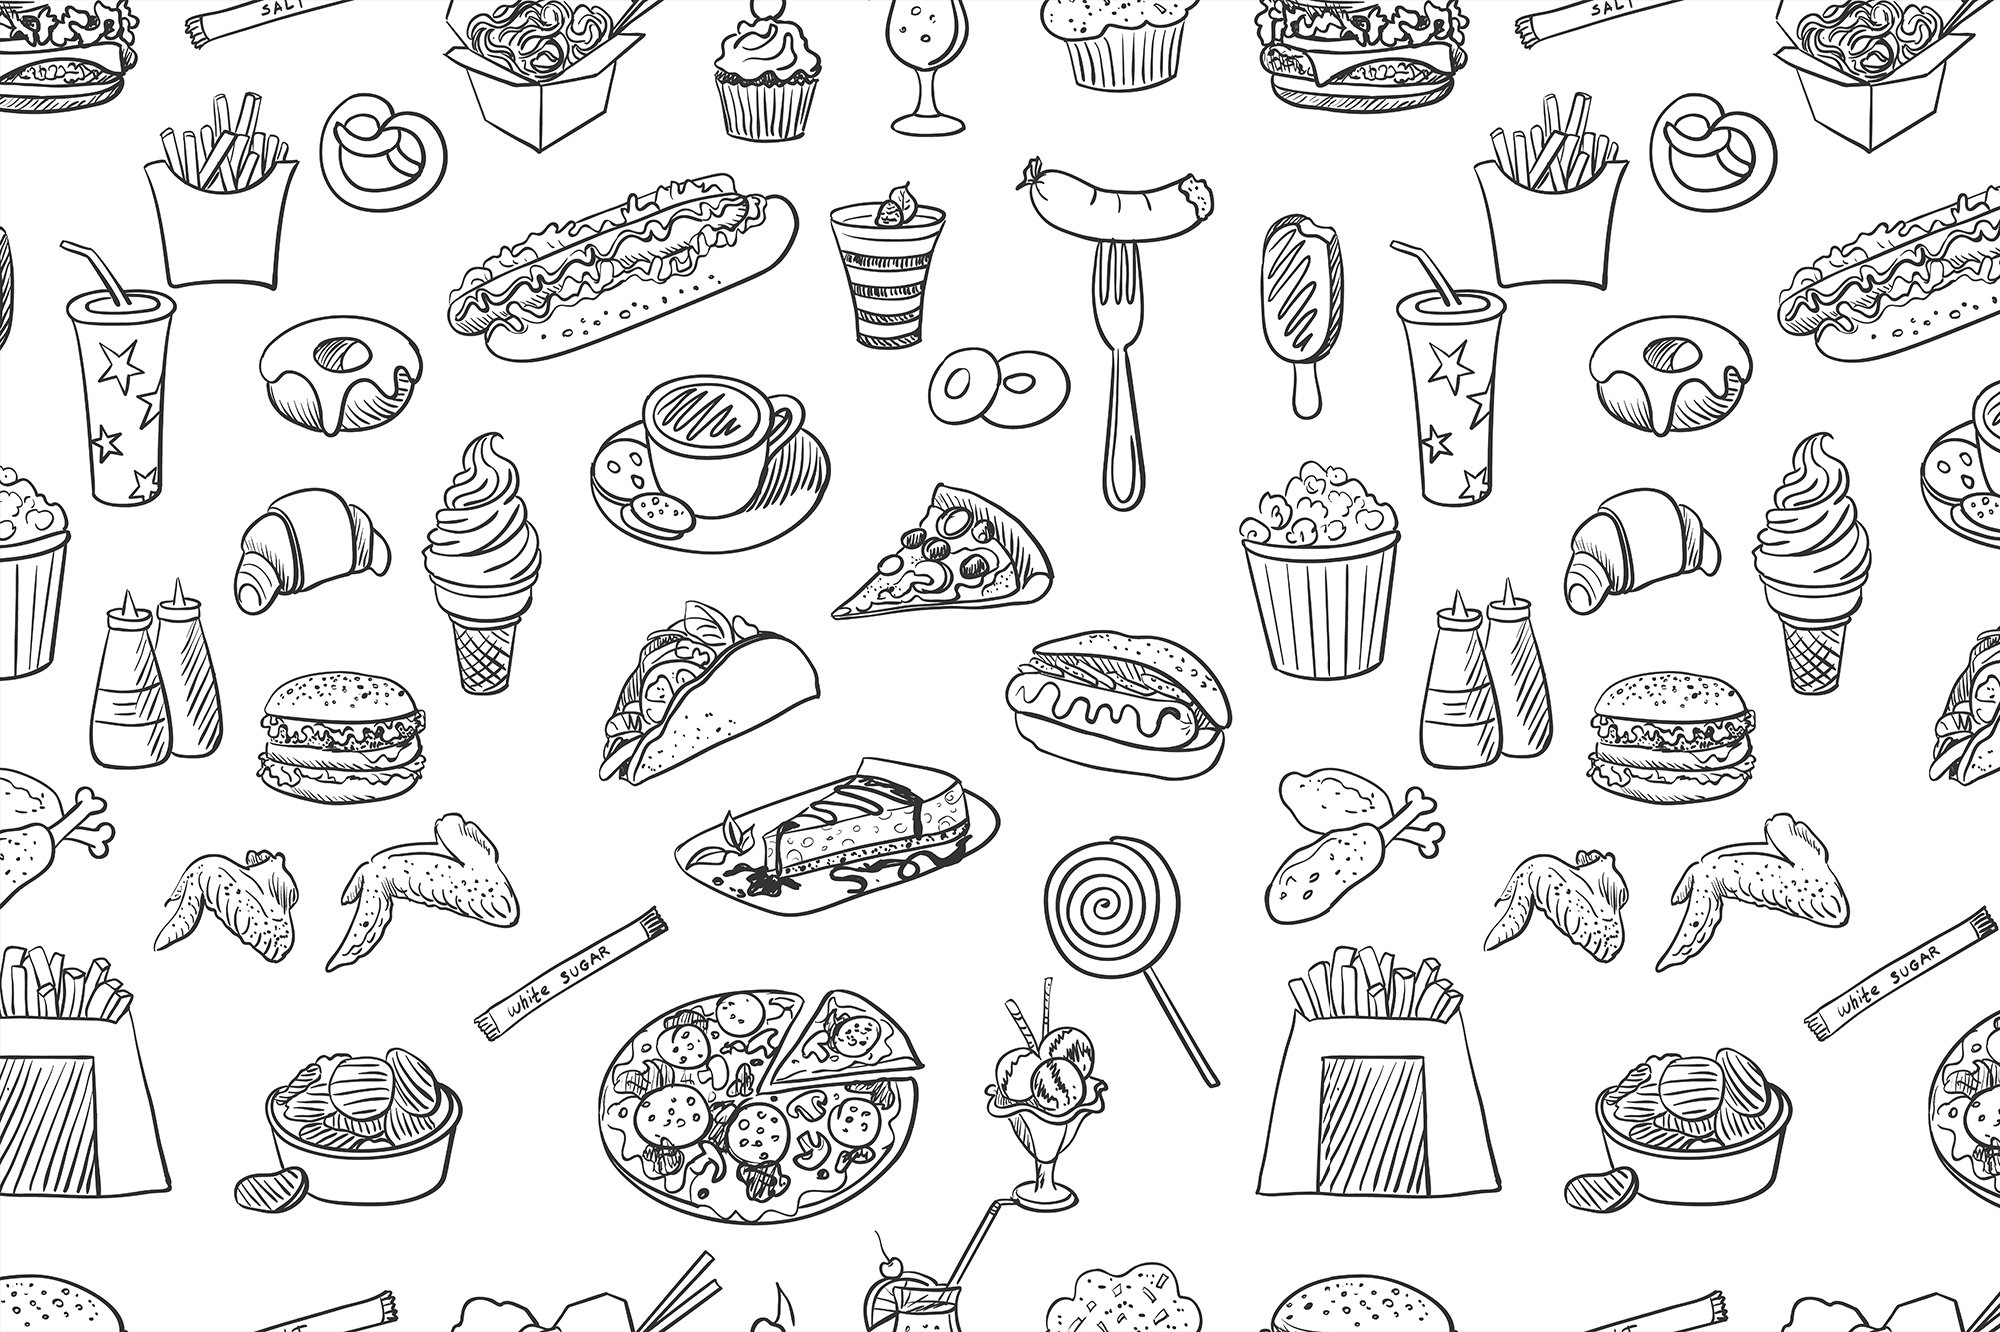 Hand drawn fast food pattern cover image.